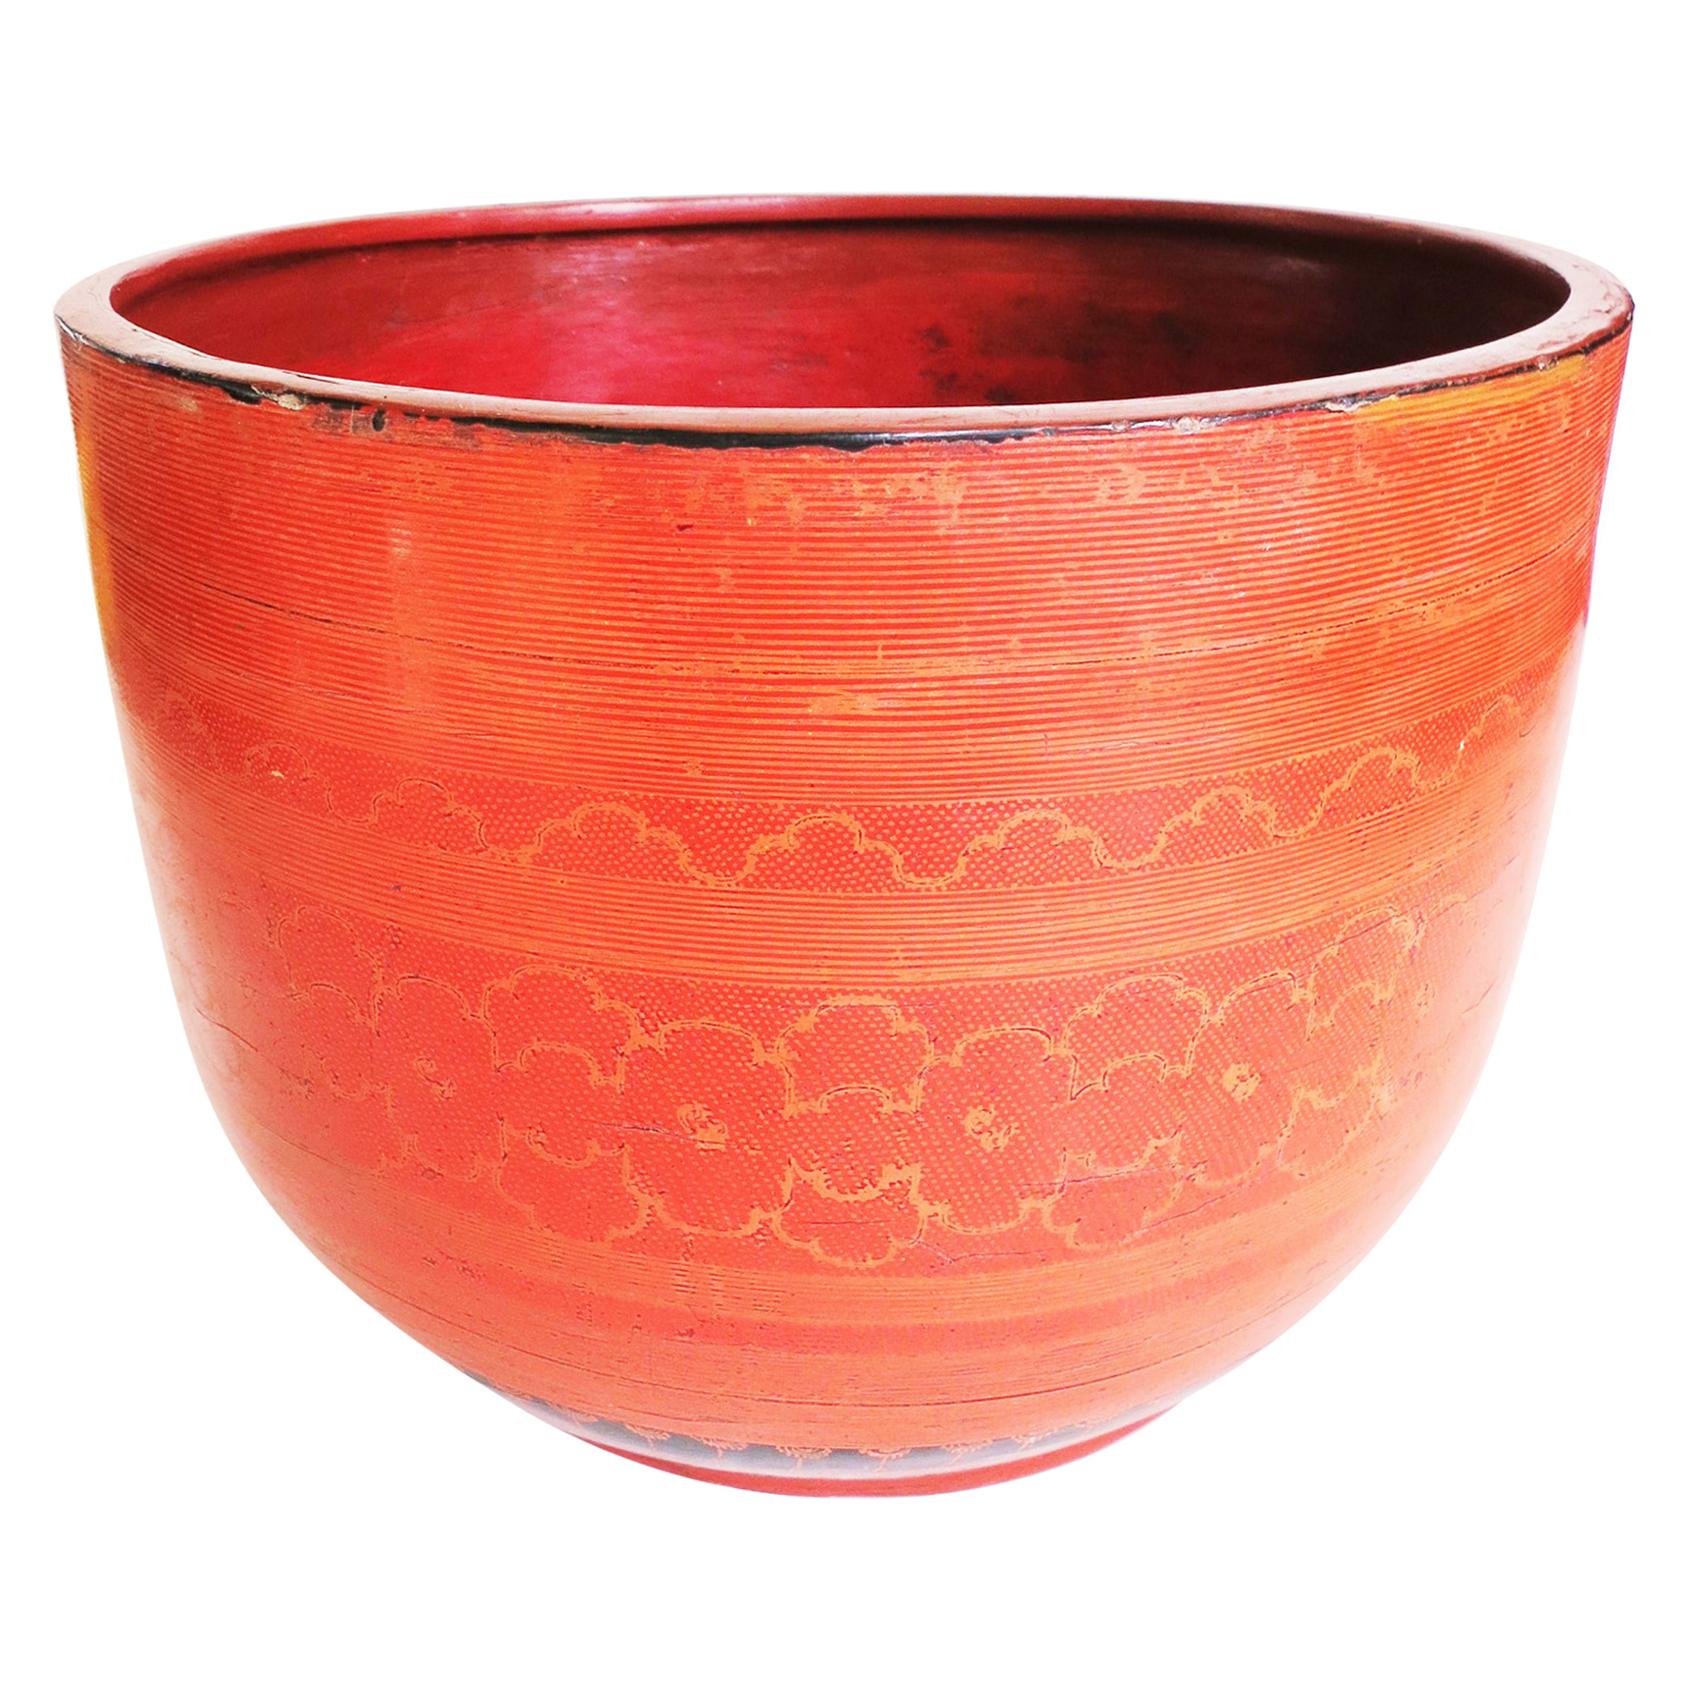 Early 20th Century Burmese Lacquered Water Bowl, "Yay Khwet Gyi"